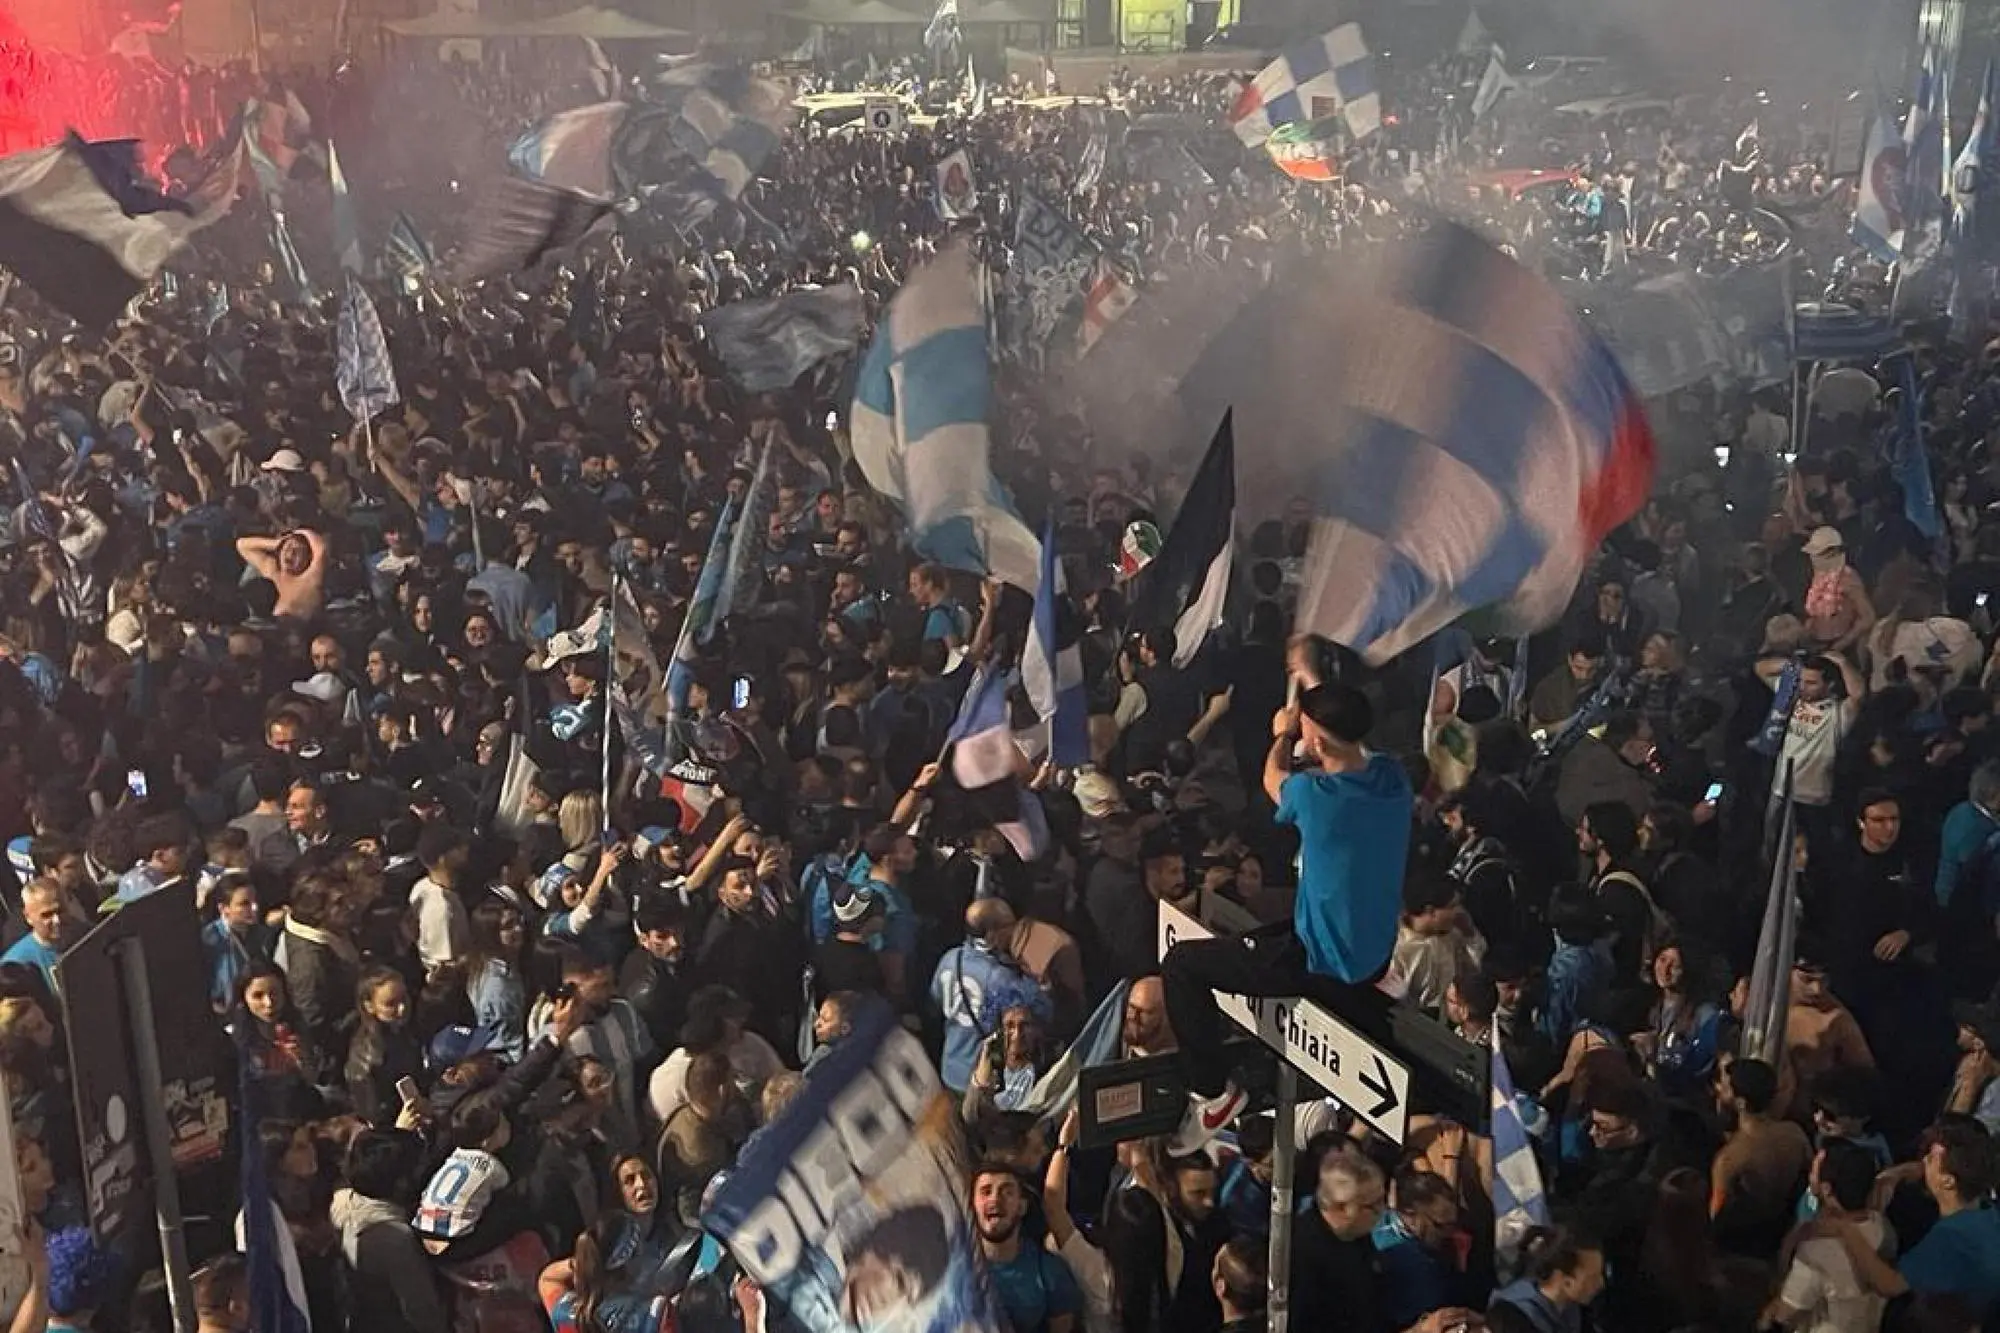 SSC Napoli’s supporters celebrate the victory of the Italian Serie A Championship (Scudetto) at the end of the match against Udinese Calcio in the centre of Naples, Italy, 04 May 2023. ANSA/CIRO FUSCO